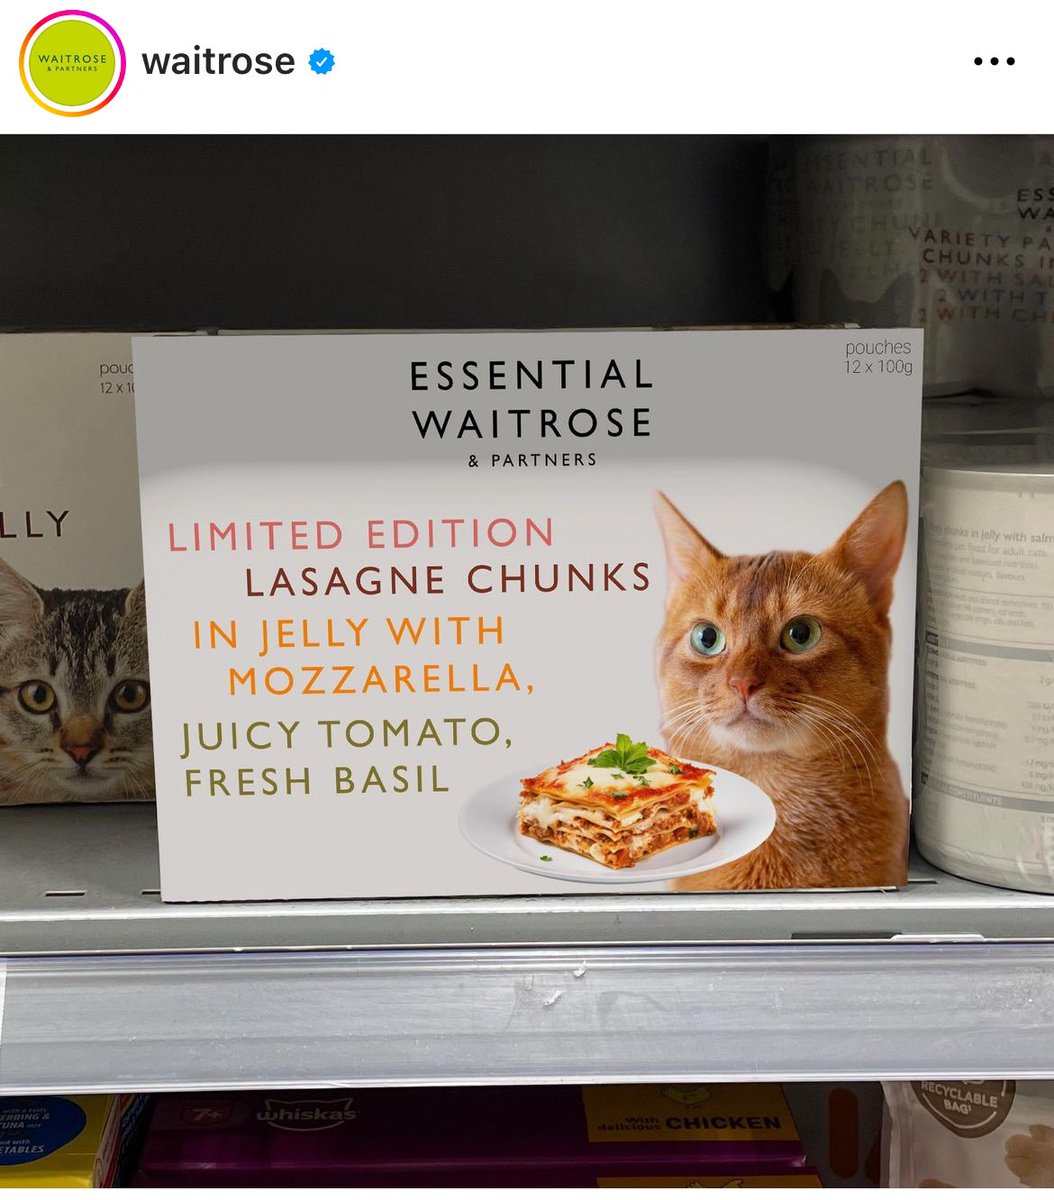 The most Waitrose thing I’ve ever seen